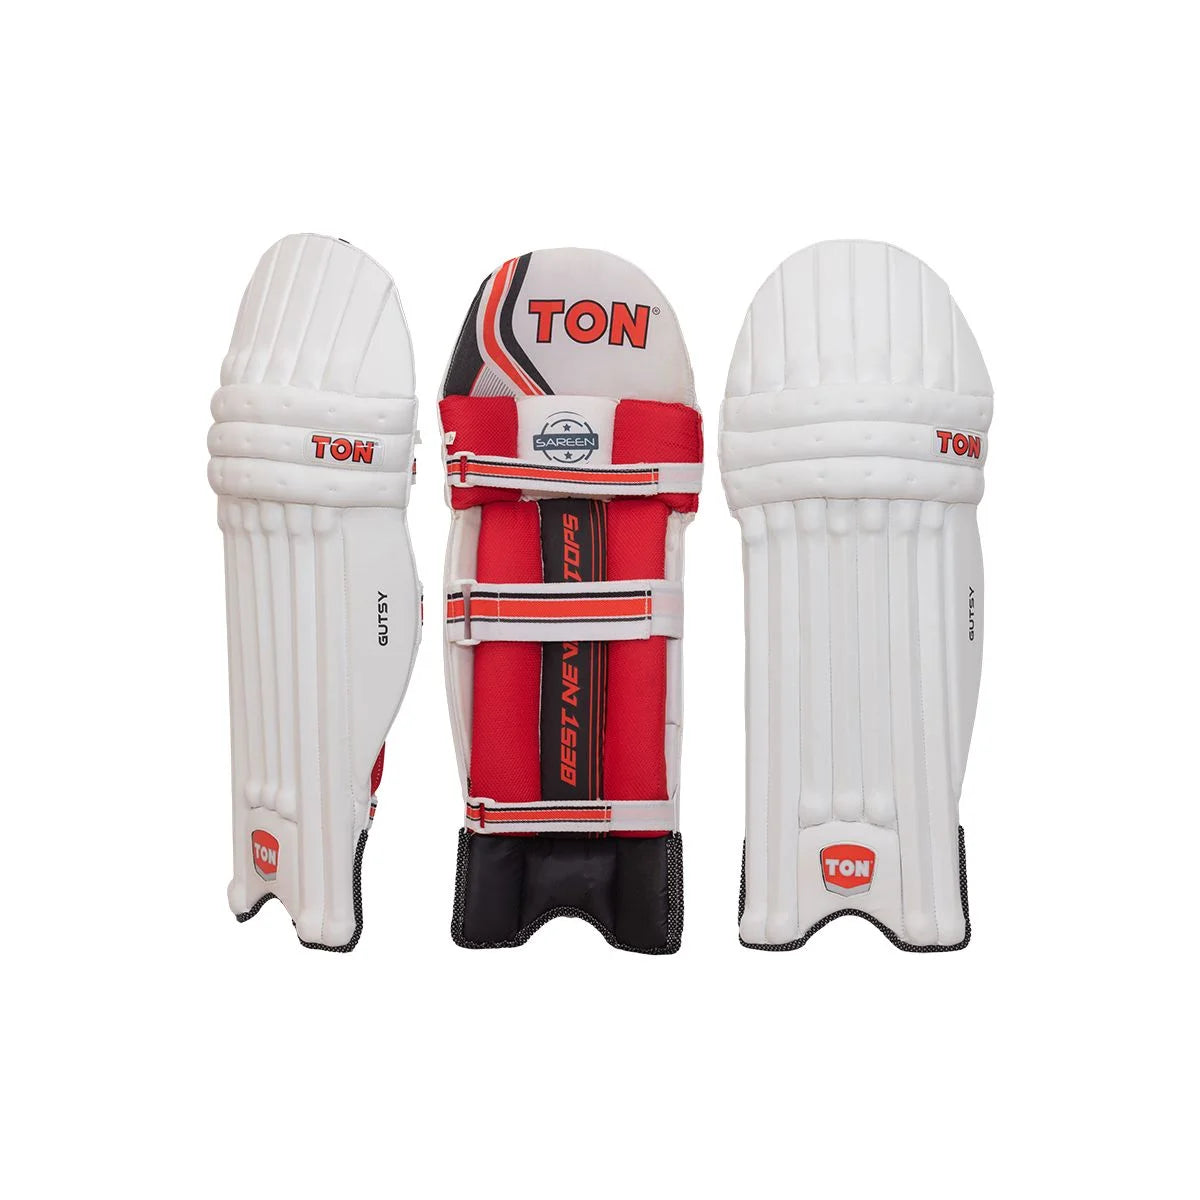 SS Ton Gutsy Light Weight Cricket Batting Pads Pack of 3